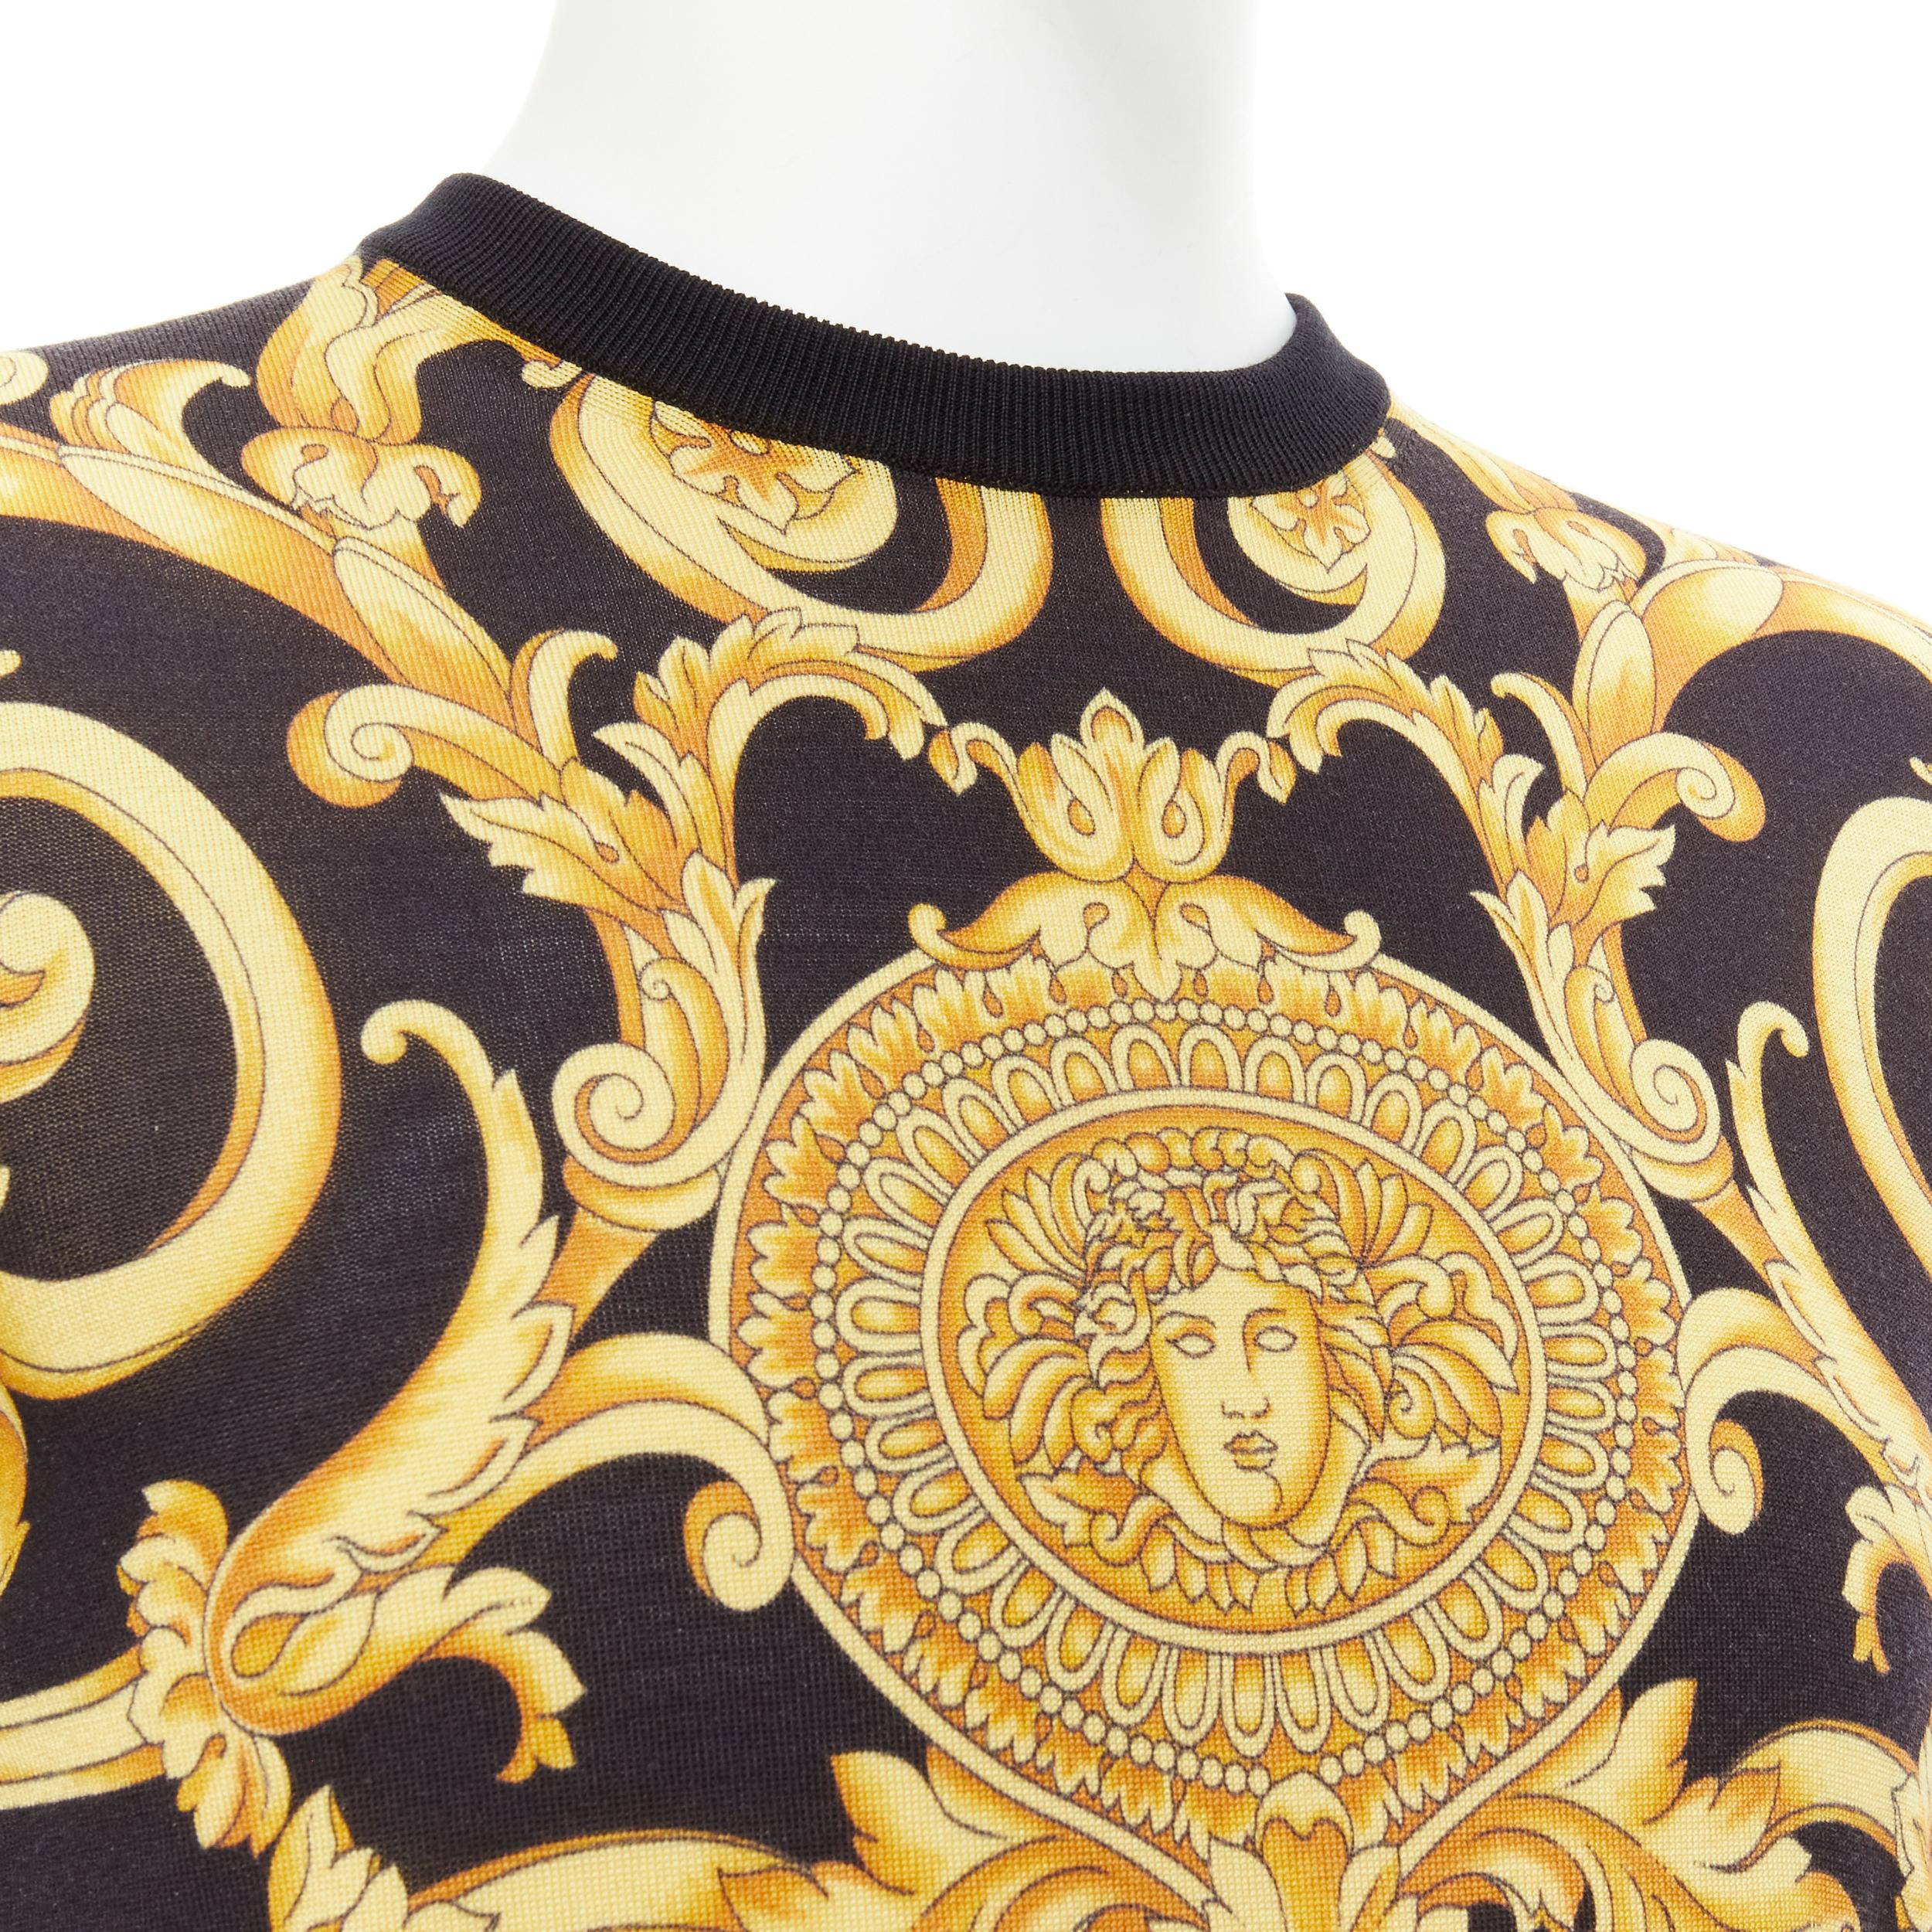 new VERSACE black gold Barocco Hibiscus Medusa 100% silk knit sweater IT48 M
Reference: TGAS/C00285 
Brand: Versace 
Designer: Donatella Versace 
Material: Silk 
Color: Black 
Pattern: Floral 
Extra Detail: 100% silk knit. Black base with signature